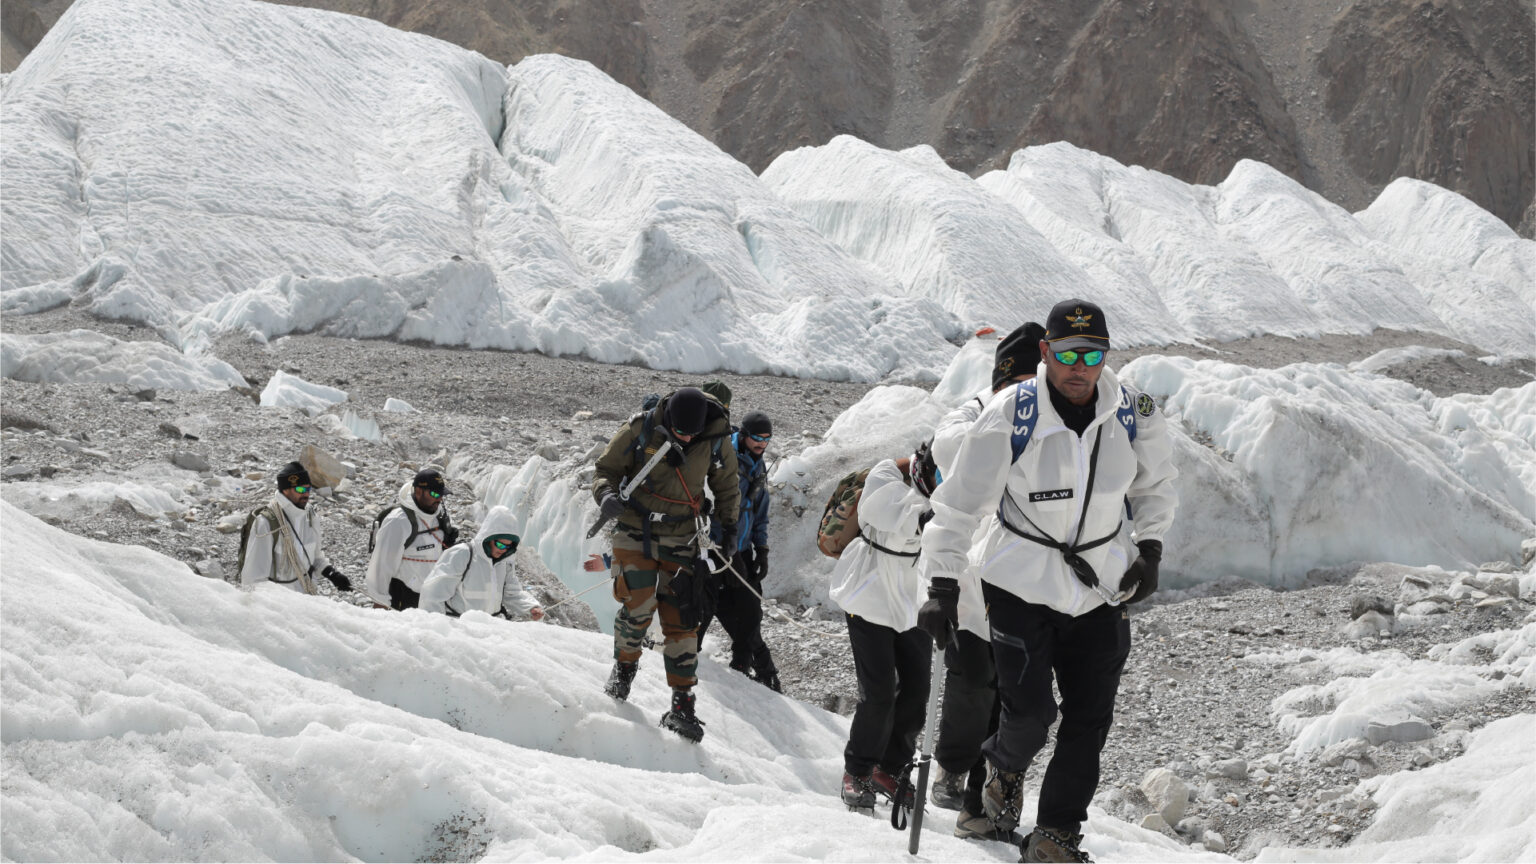 People in special gear in a high altitude area covered in ice and snow